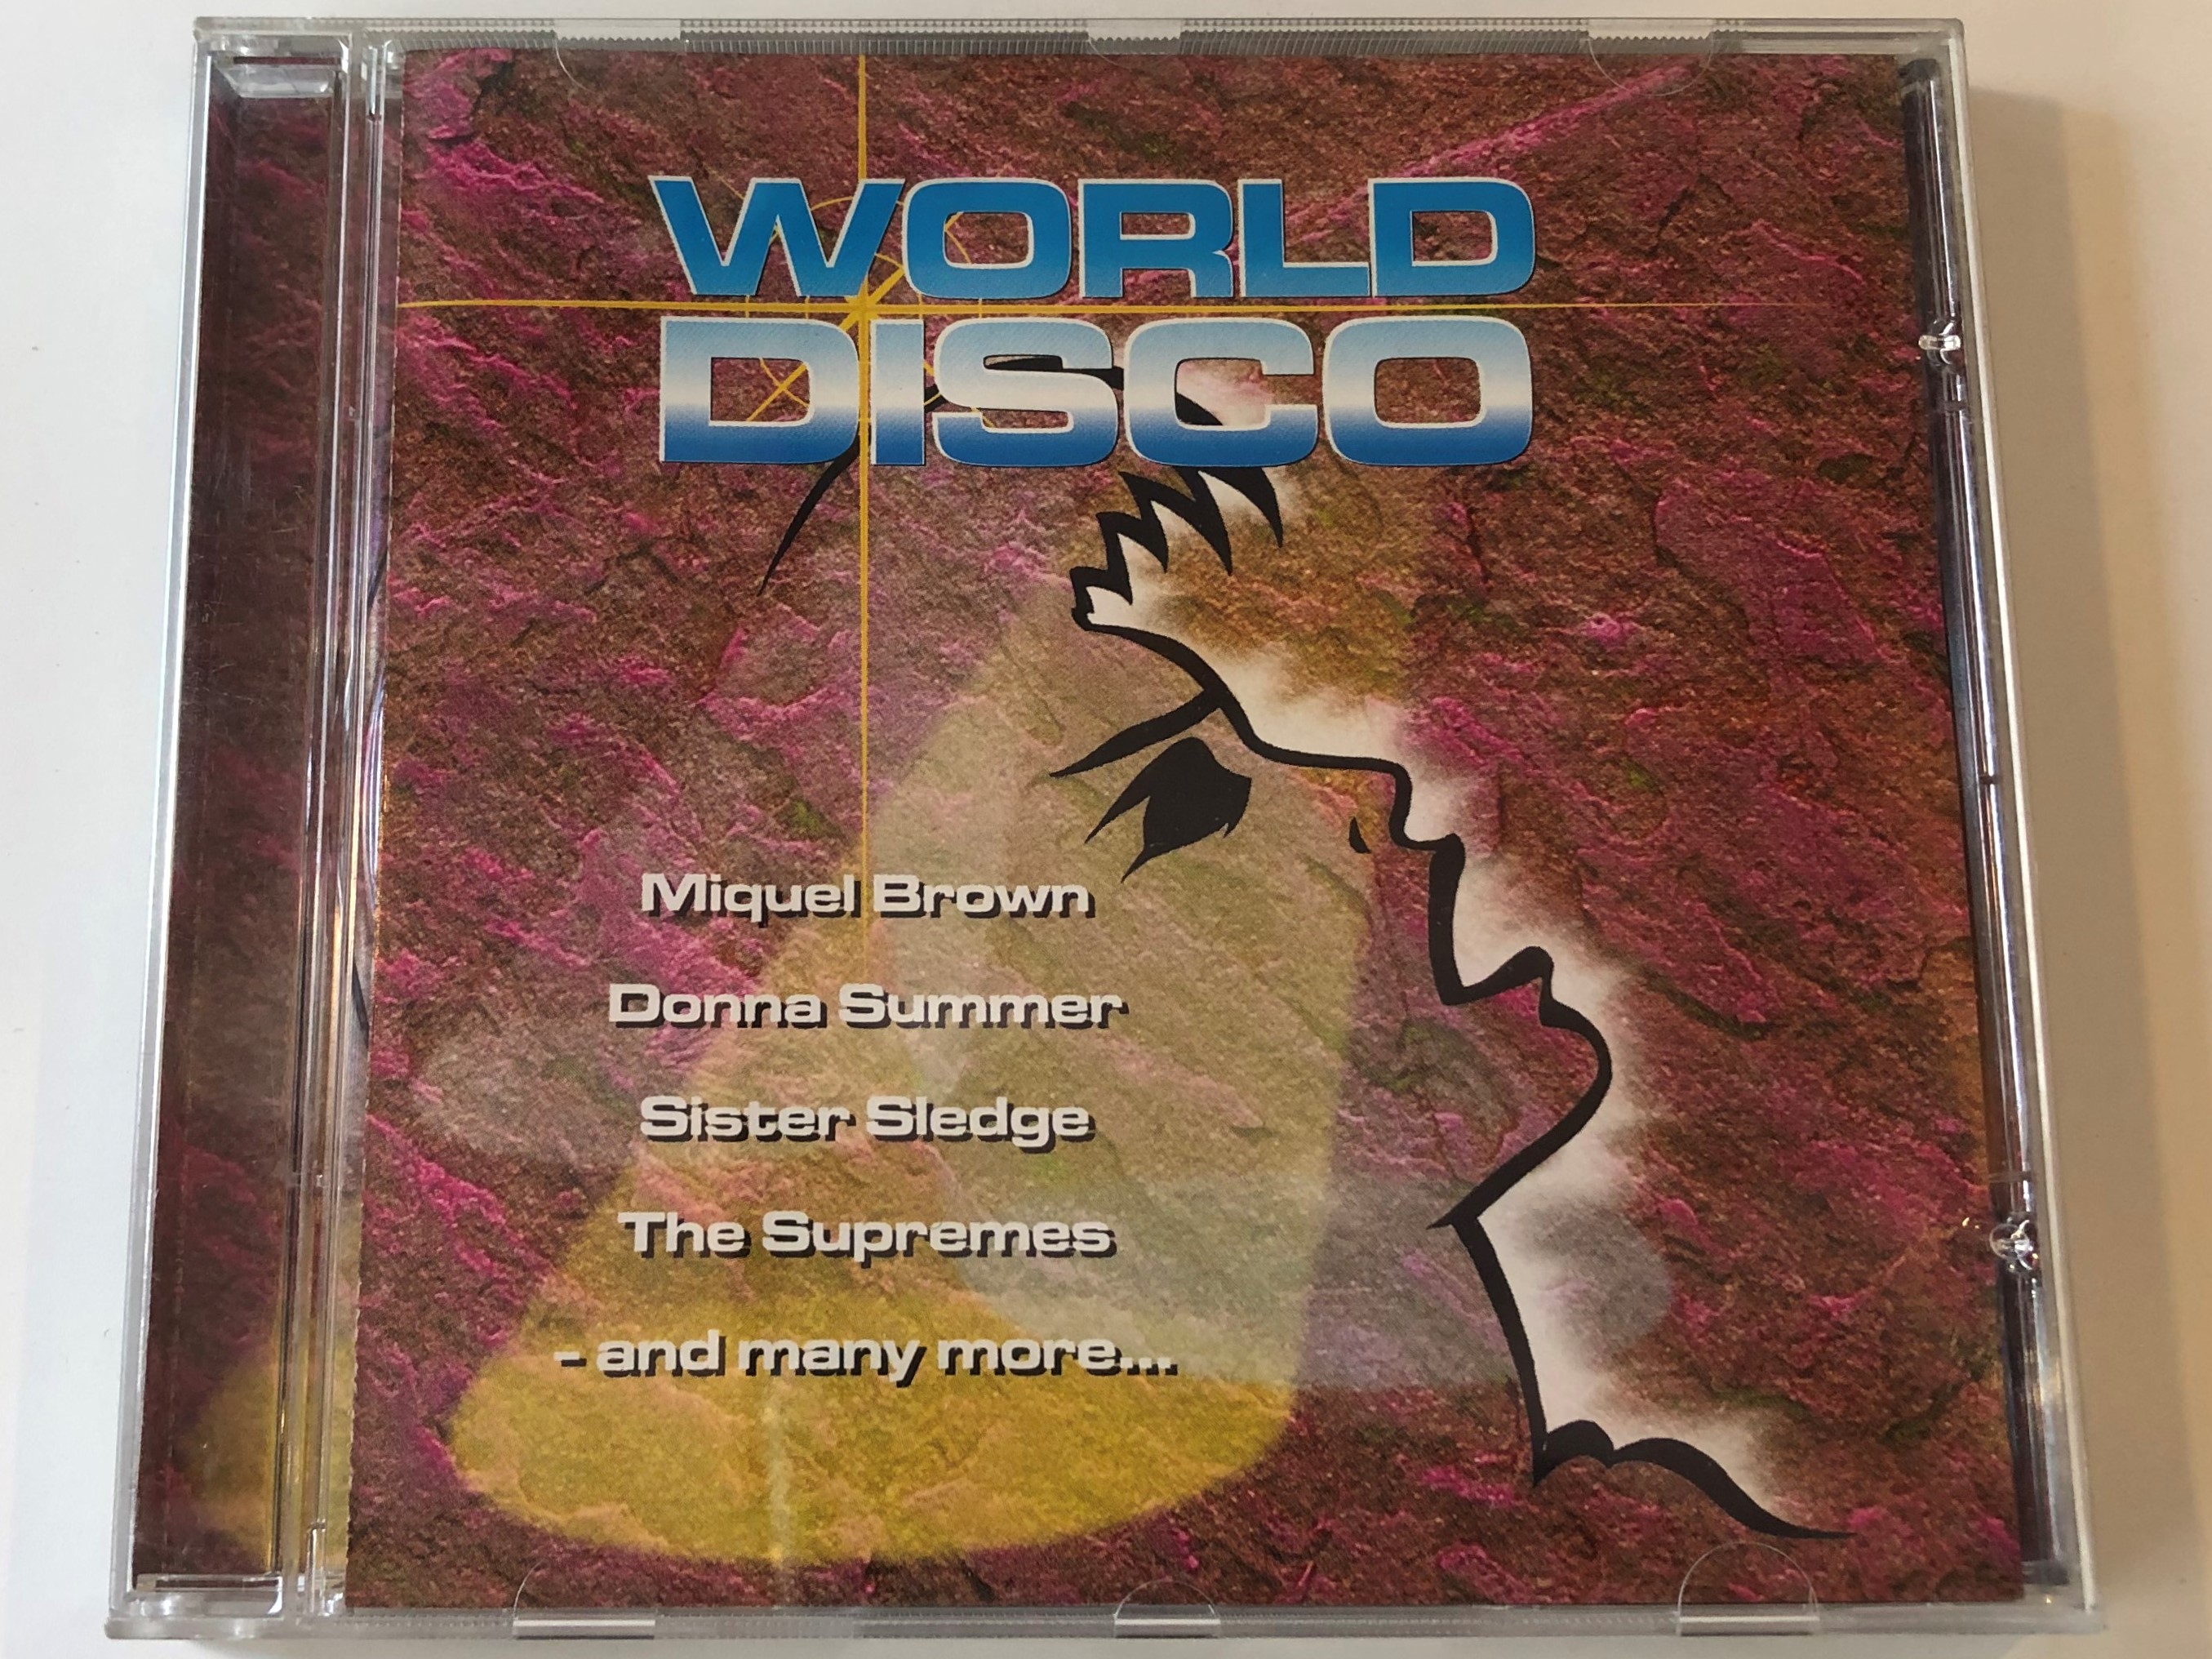 world-disco-miquel-brown-donna-summer-sister-sledge-the-supremes-and-many-more...-elap-audio-cd-1998-57433cd-1-.jpg